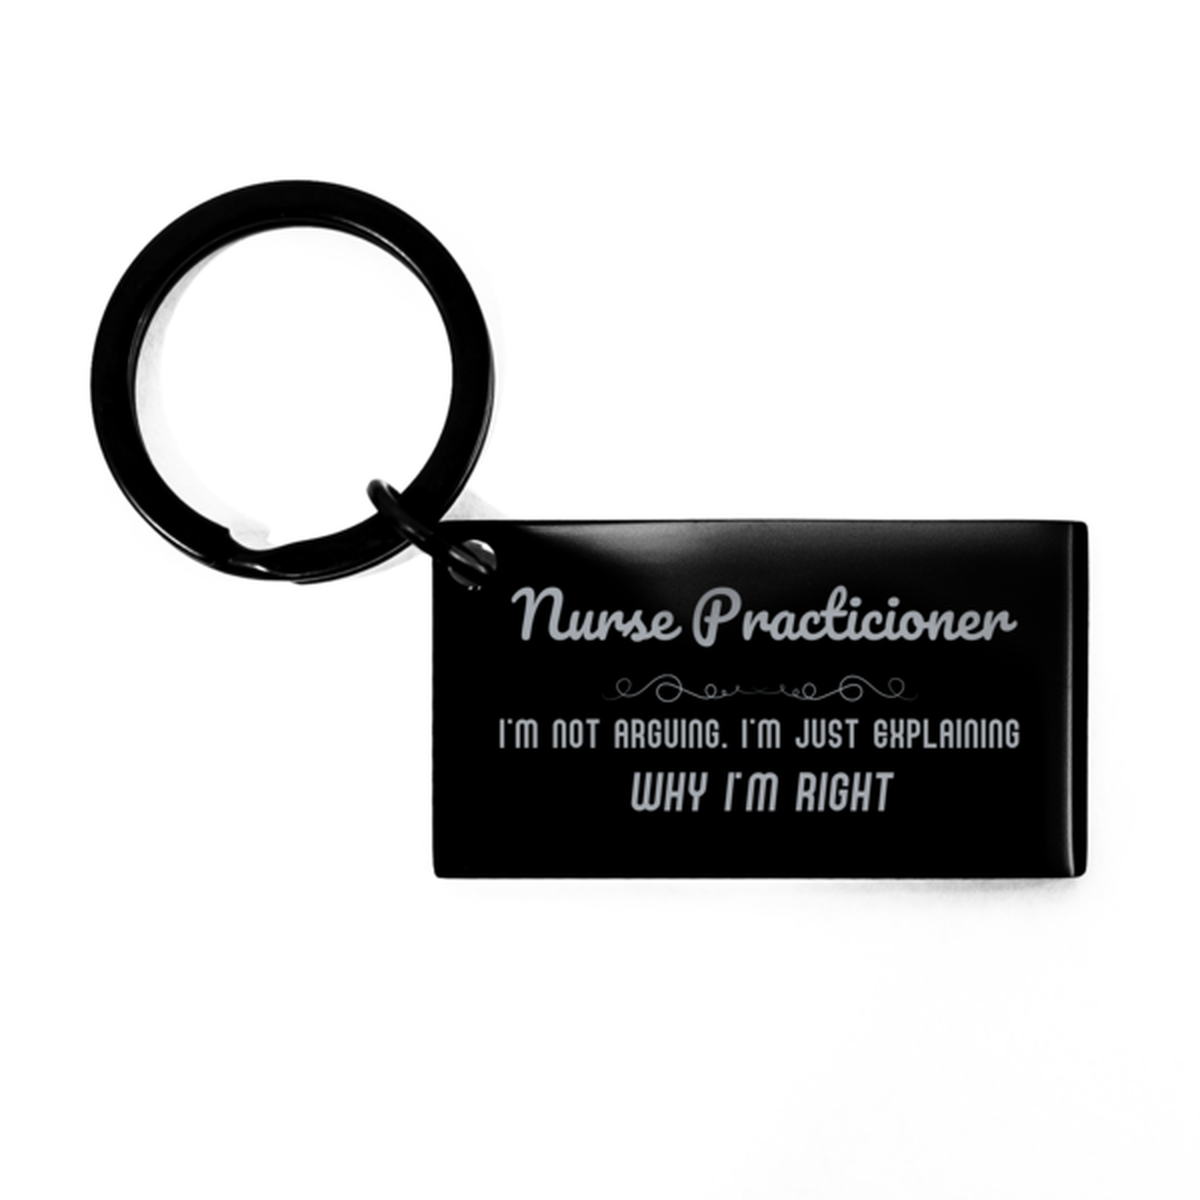 Nurse Practicioner I'm not Arguing. I'm Just Explaining Why I'm RIGHT Keychain, Funny Saying Quote Nurse Practicioner Gifts For Nurse Practicioner Graduation Birthday Christmas Gifts for Men Women Coworker